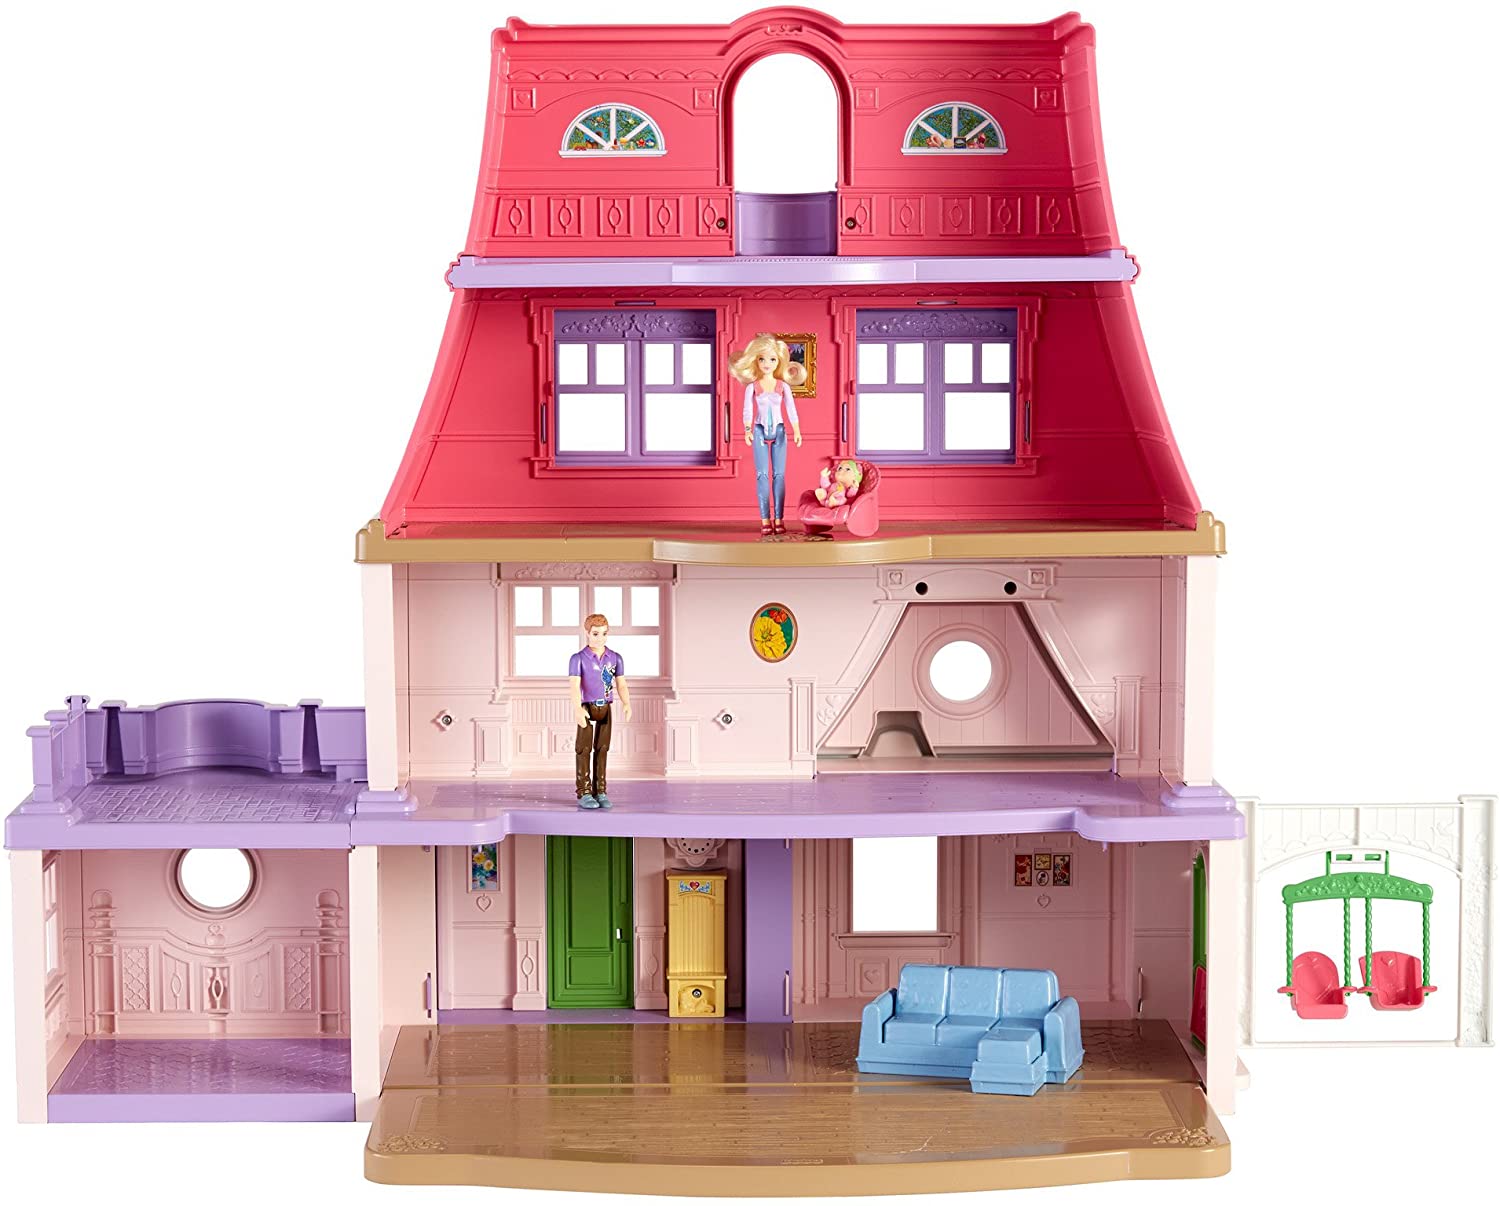 9 Best Fisher Price Dollhouse Reviews of 2023 9